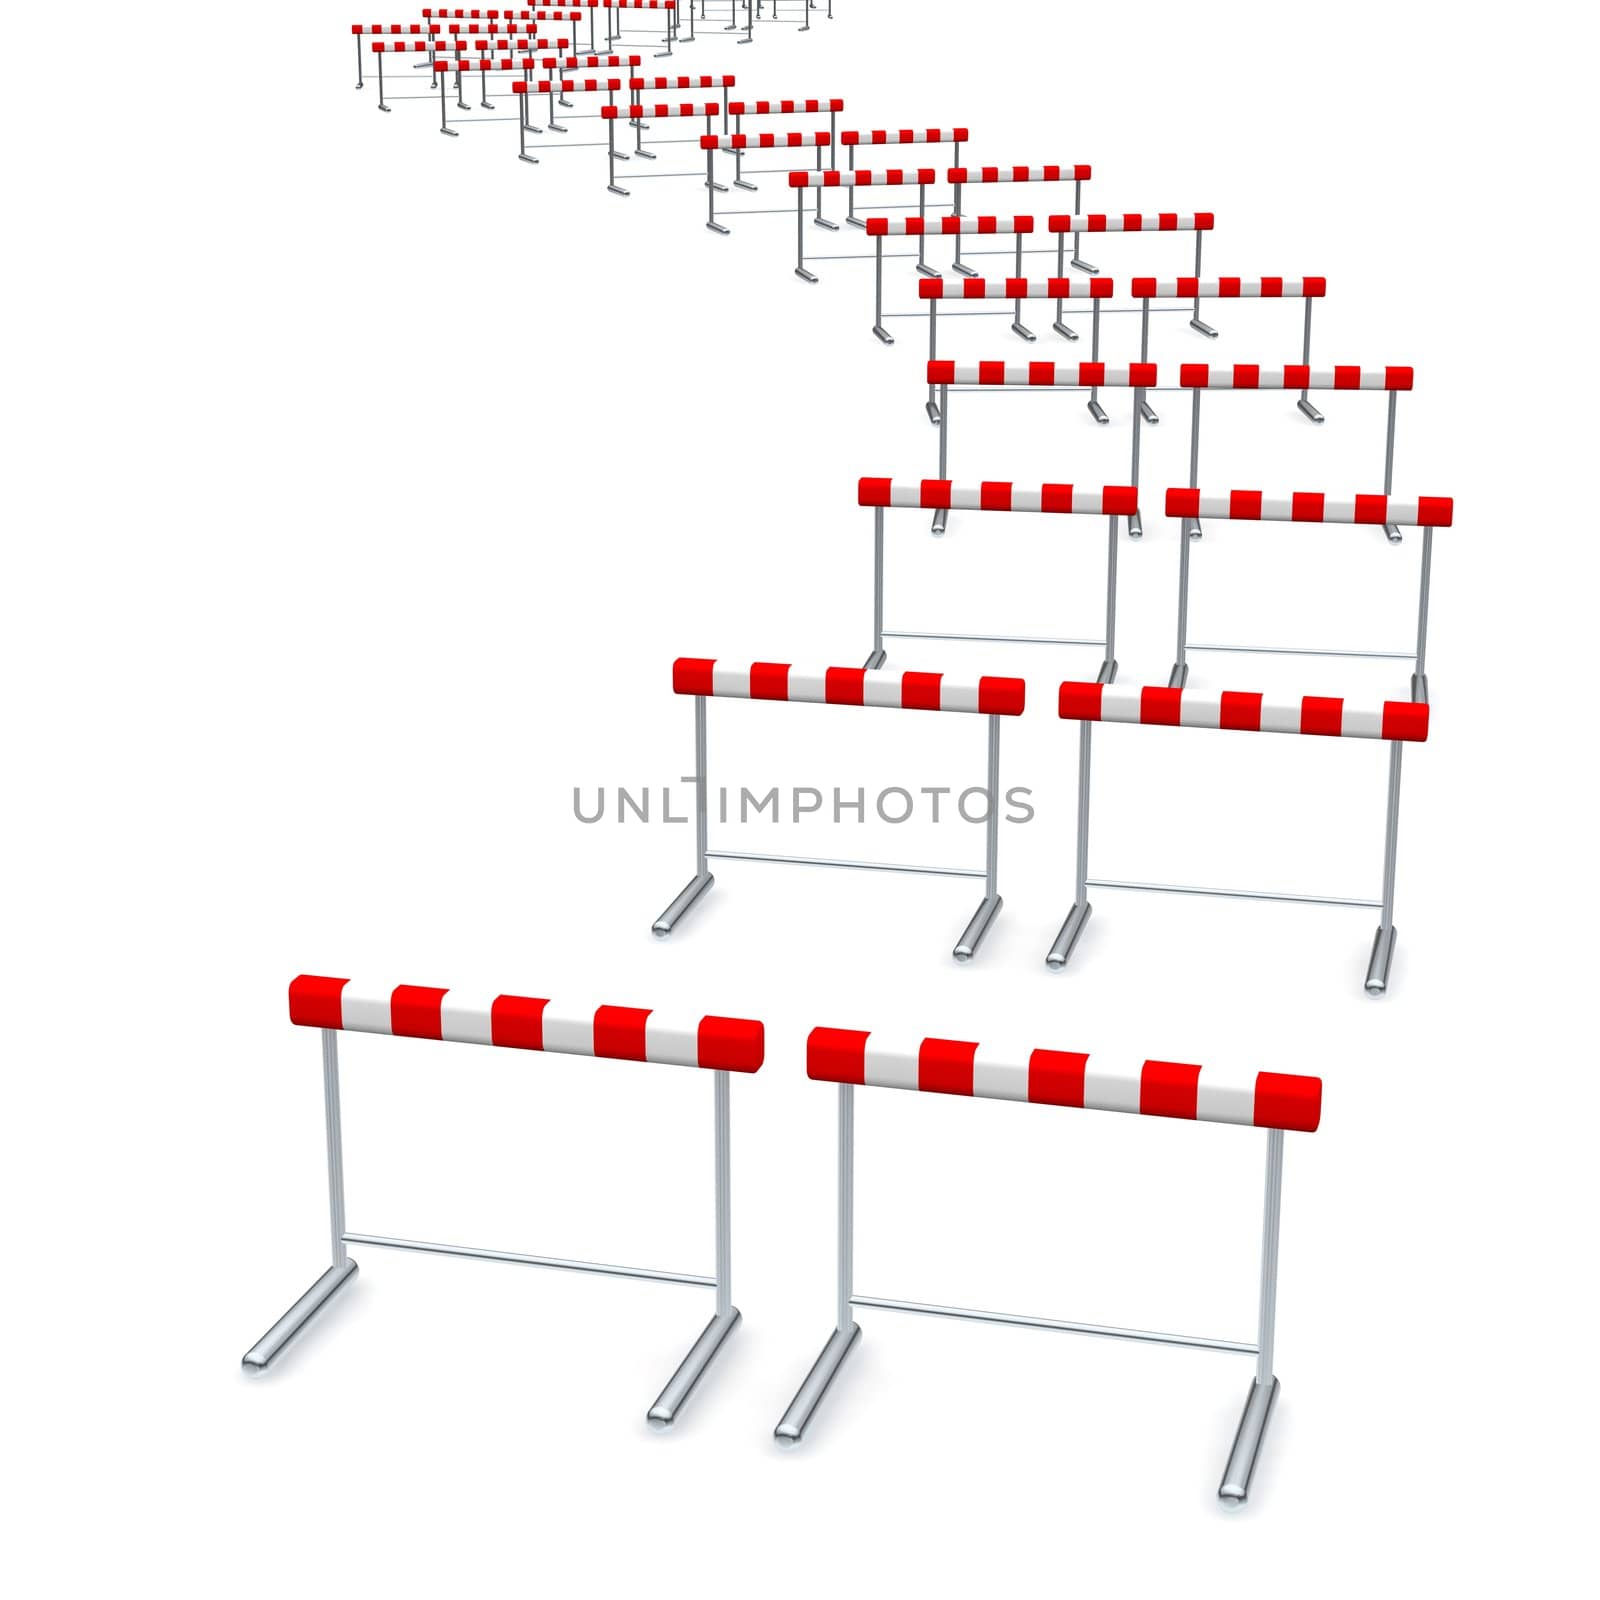 Hurdles track. 3d rendered illustration isolated on white.